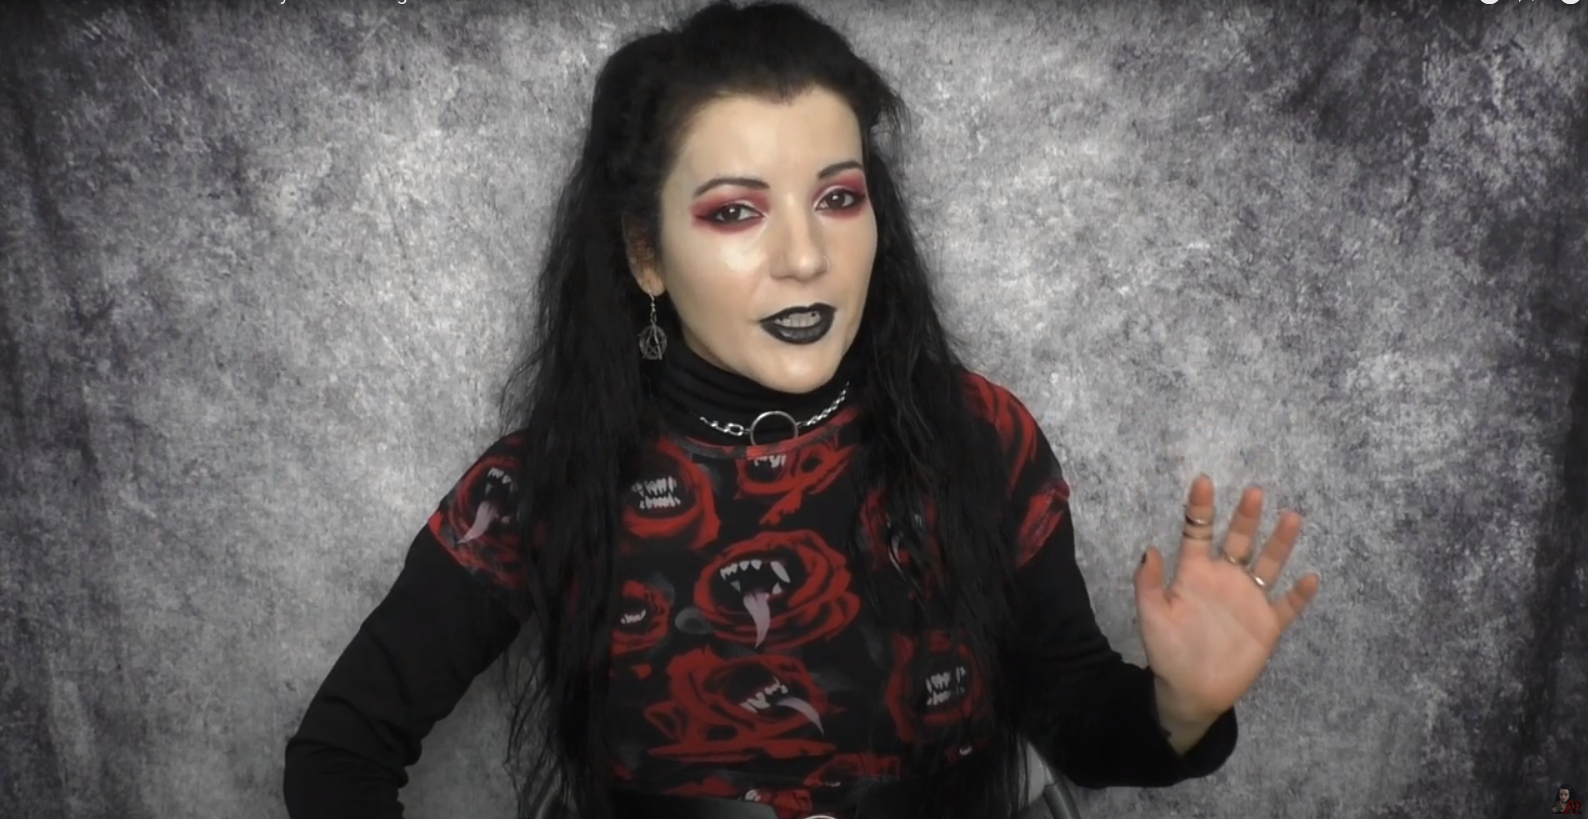 Angela Puca wearing a black shirt decorated with red demons